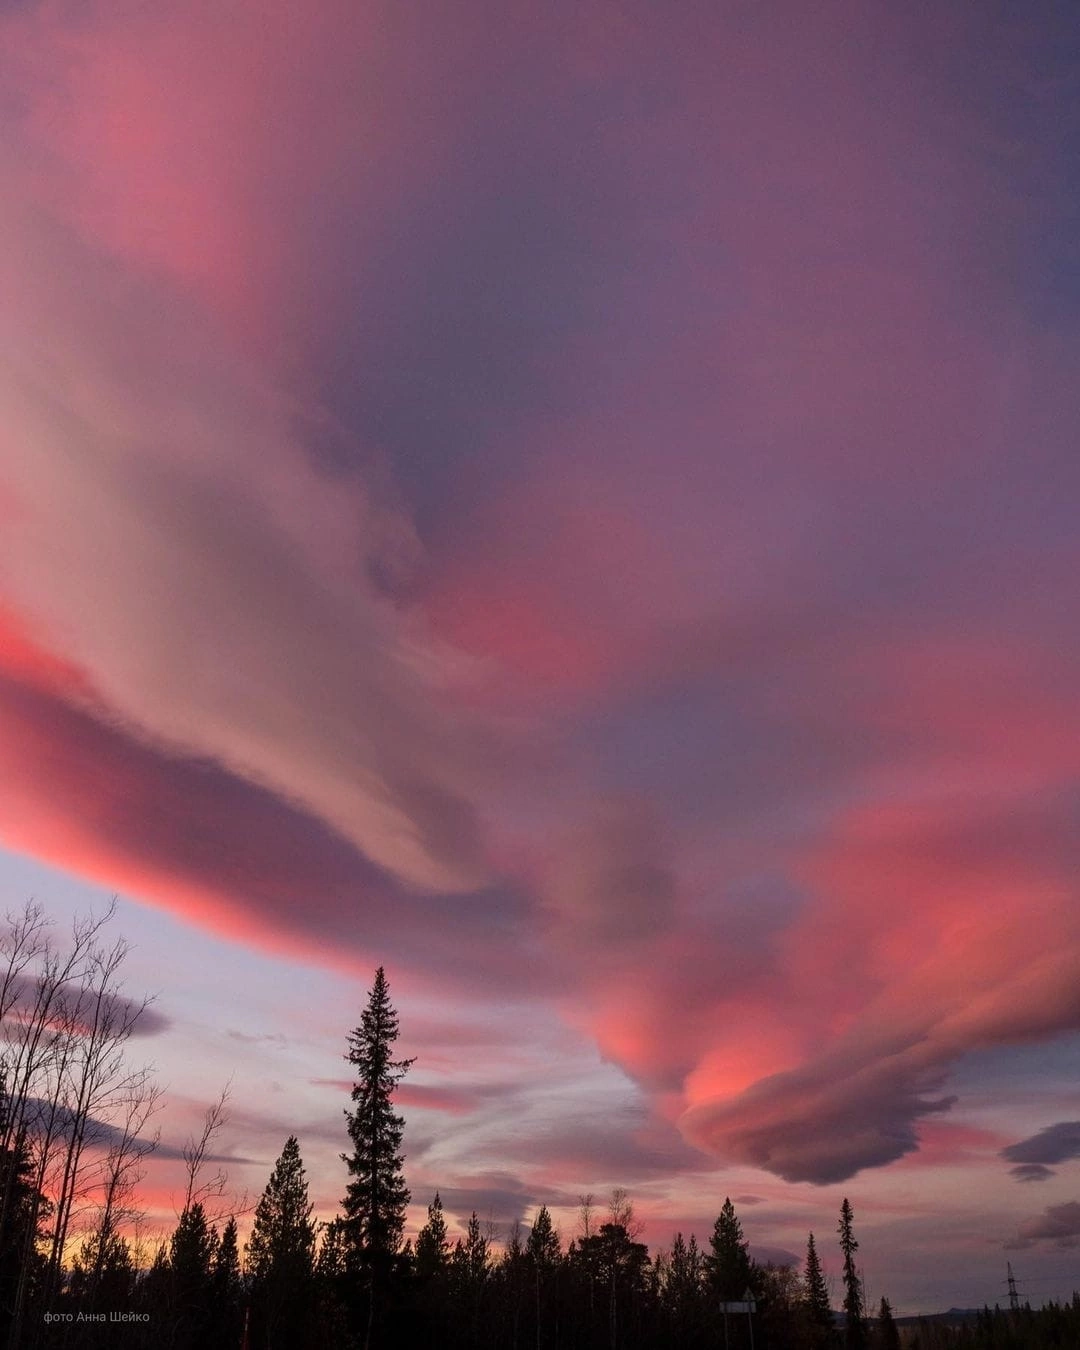 Lenticular clouds at sunset in Murmansk - The photo, The nature of Russia, Sunset, Murmansk, Lenticular clouds